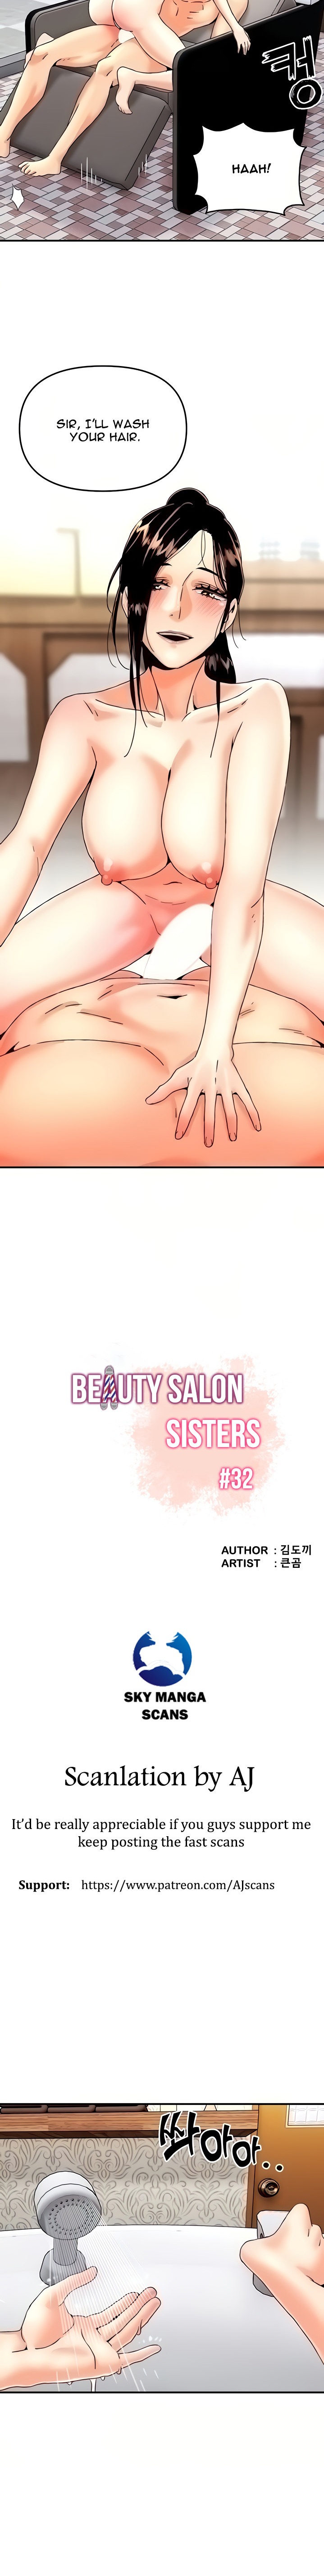 Beauty Salon Sisters - Chapter 32 Page 2